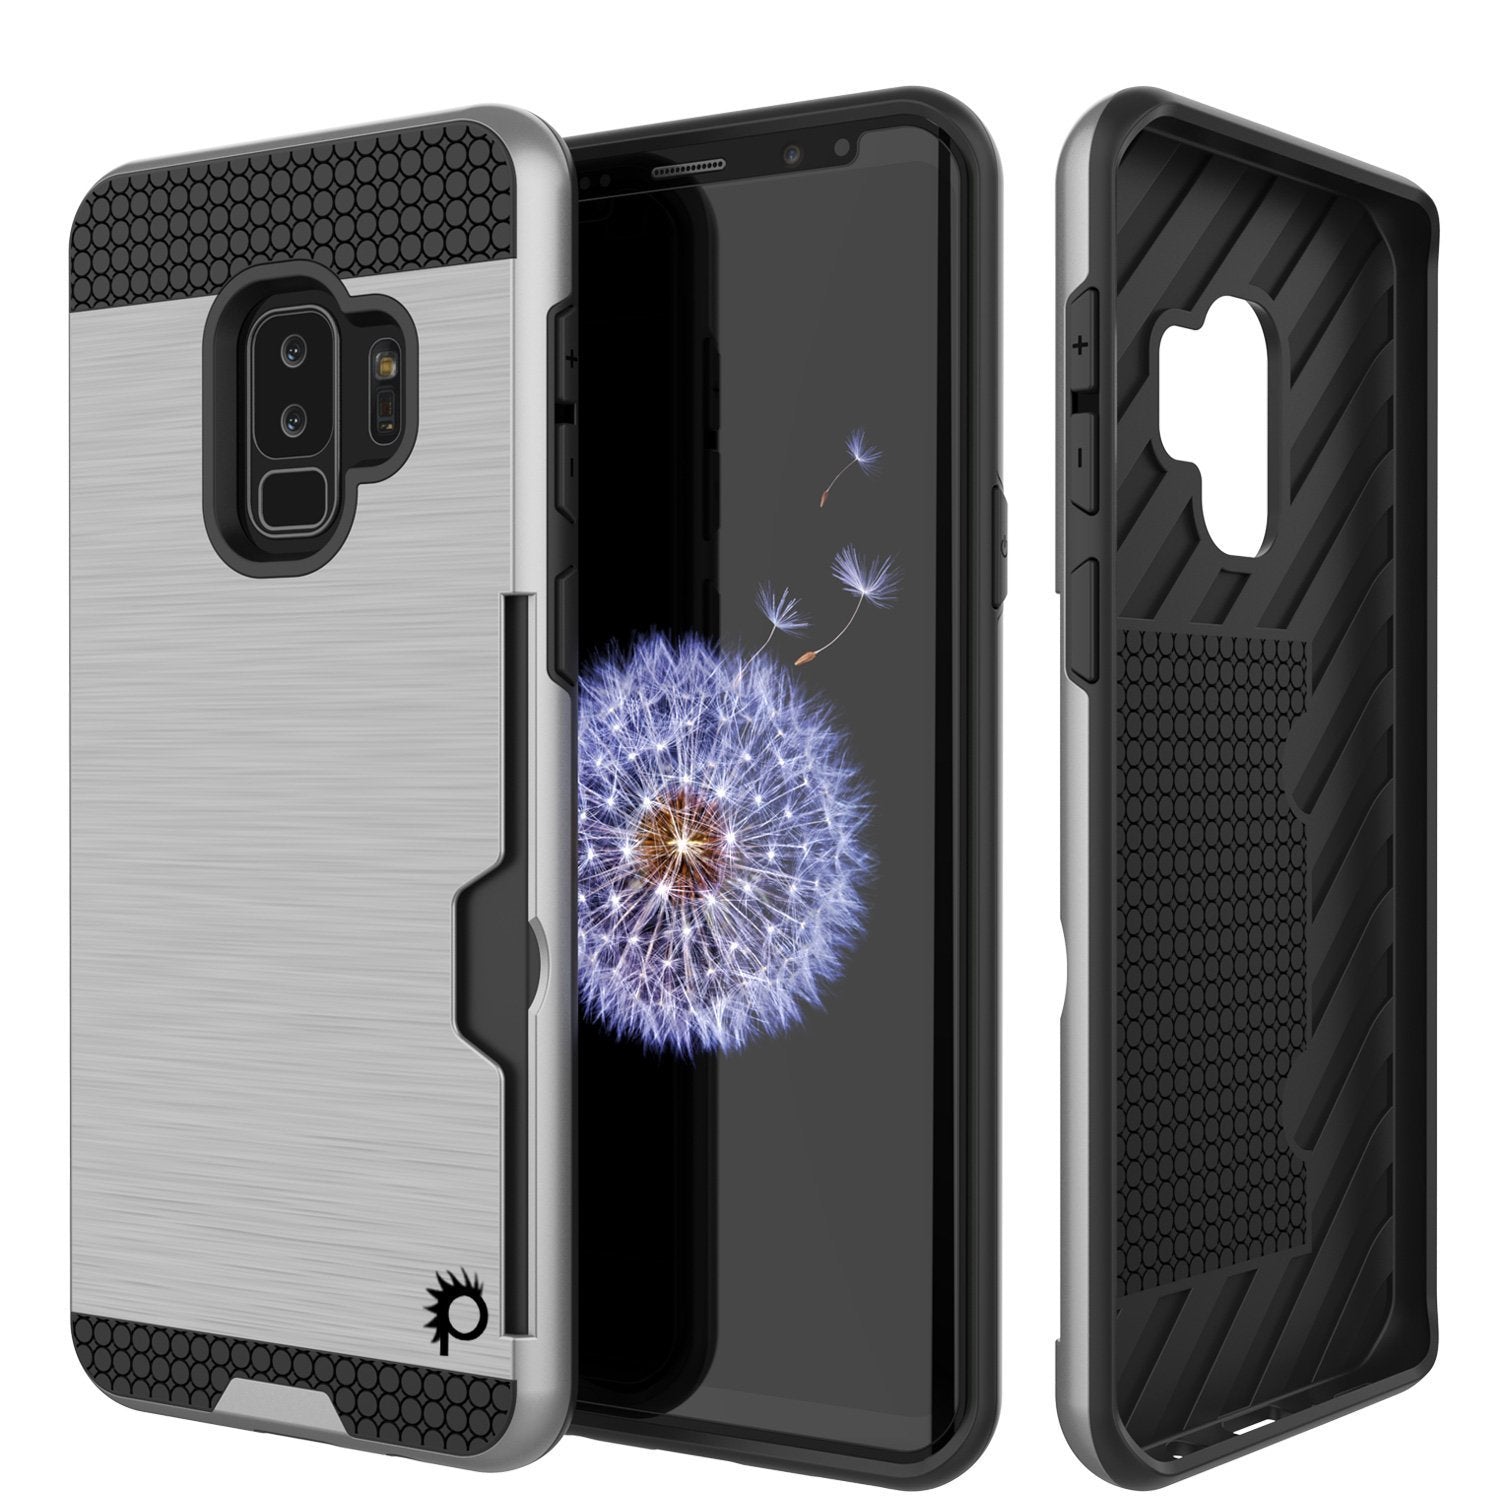 Galaxy S9 Plus Case, PUNKcase [SLOT Series] [Slim Fit] Dual-Layer Armor Cover w/Integrated Anti-Shock System, Credit Card Slot [Silver] - PunkCase NZ